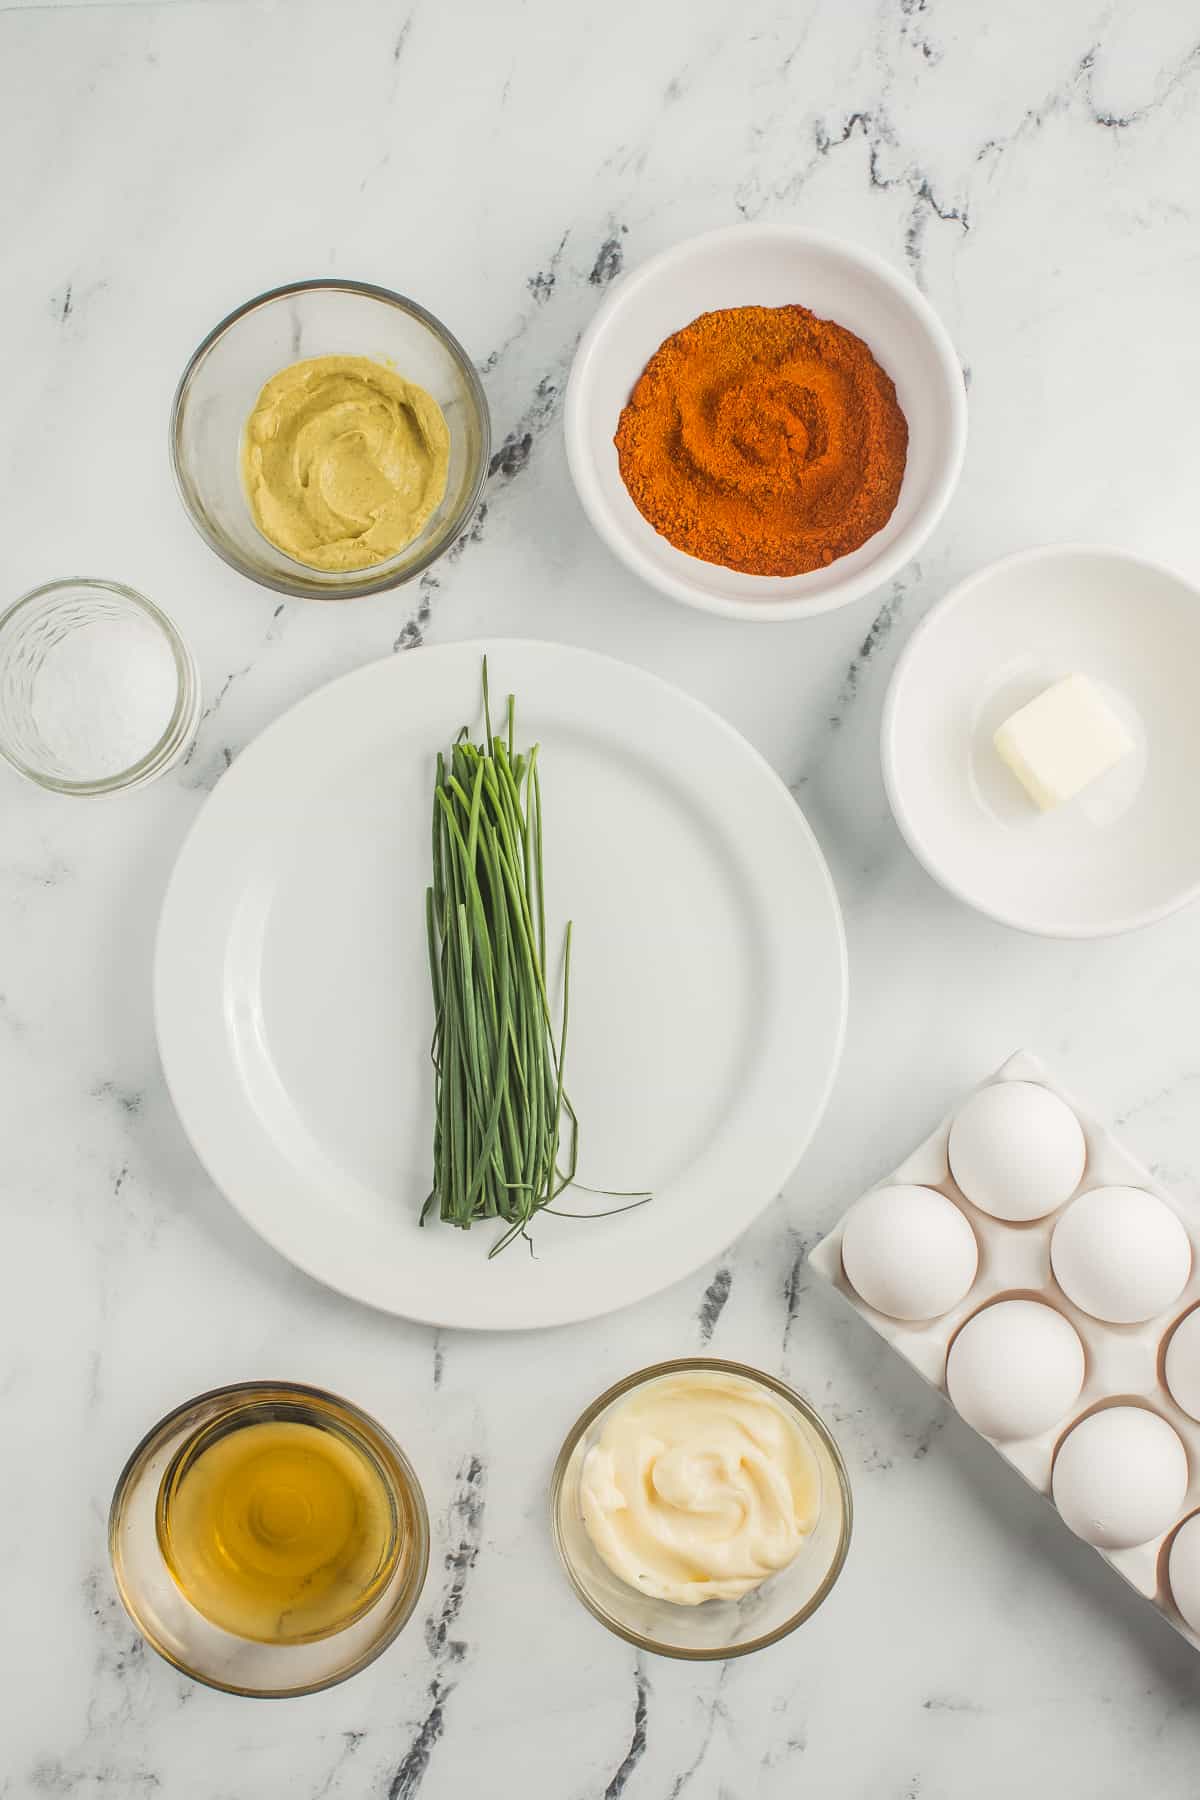 This ingredient shot focuses on the key elements required for the Deviled Eggs with Apple Cider Vinegar recipe. The ingredients are neatly presented, highlighting the components needed to prepare the delicious and tangy deviled eggs.